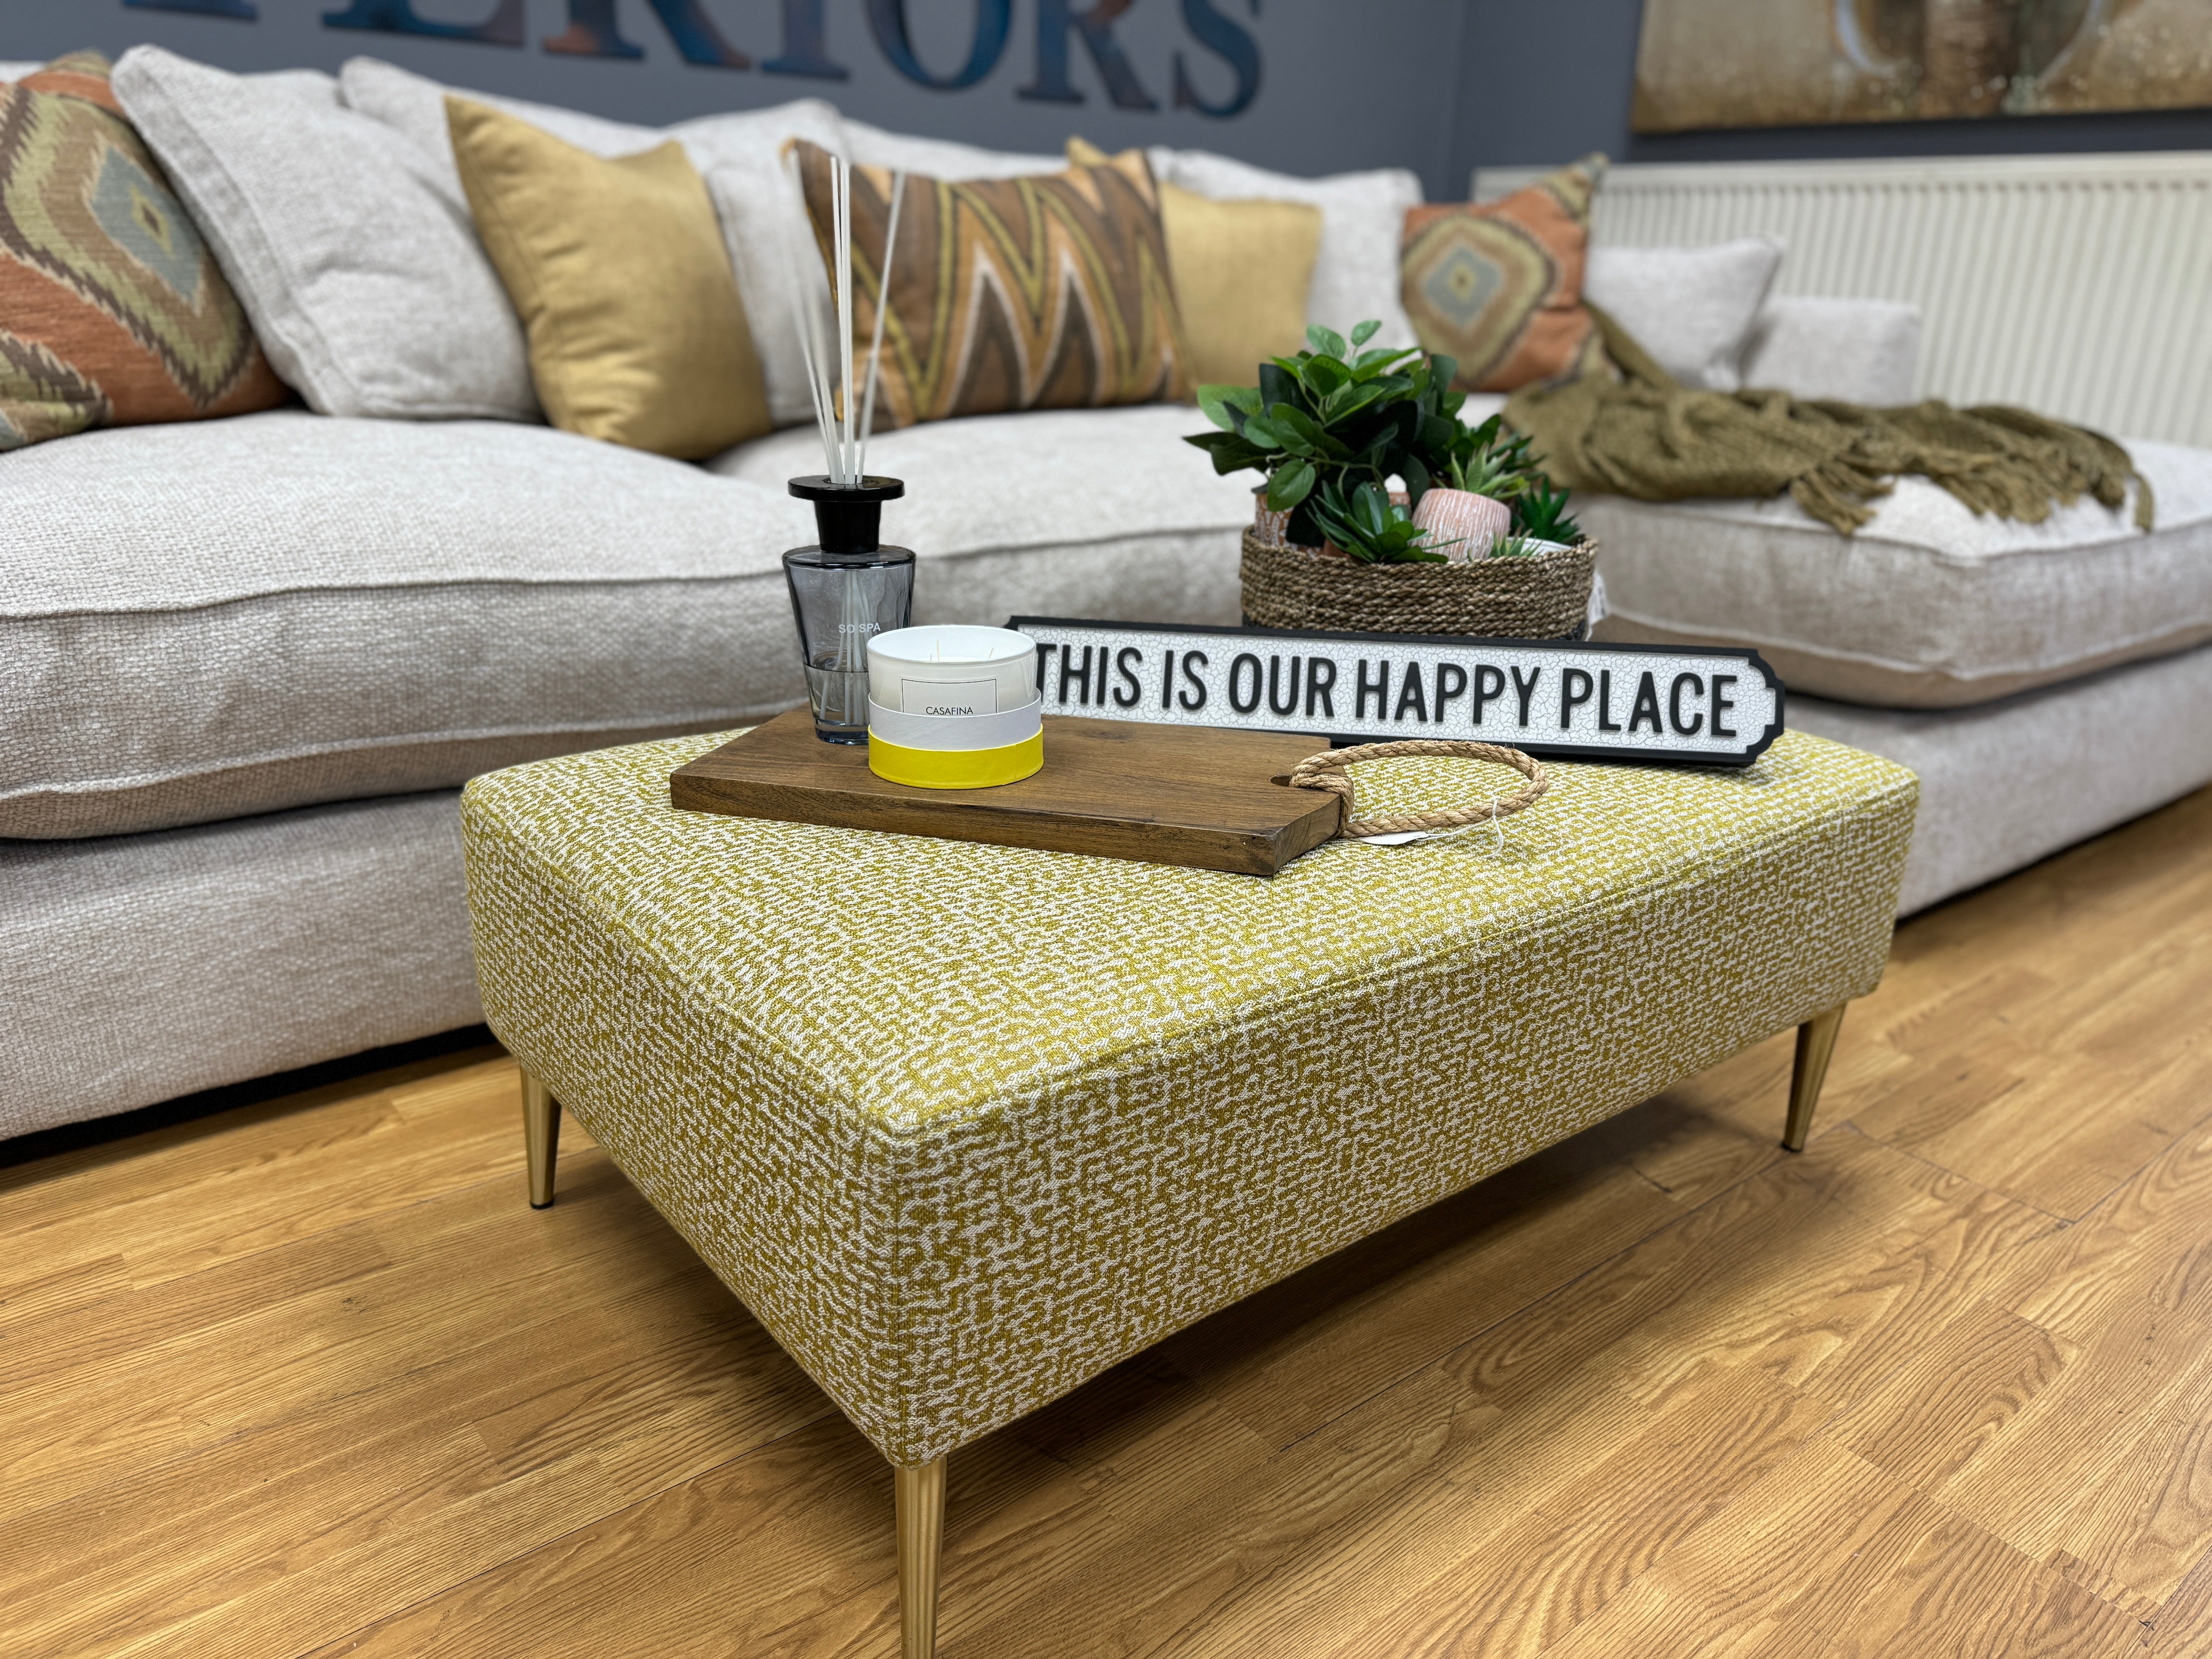 COLLINS & HAYES BEAU footstool side table in removable mustard yellow pattern fabric